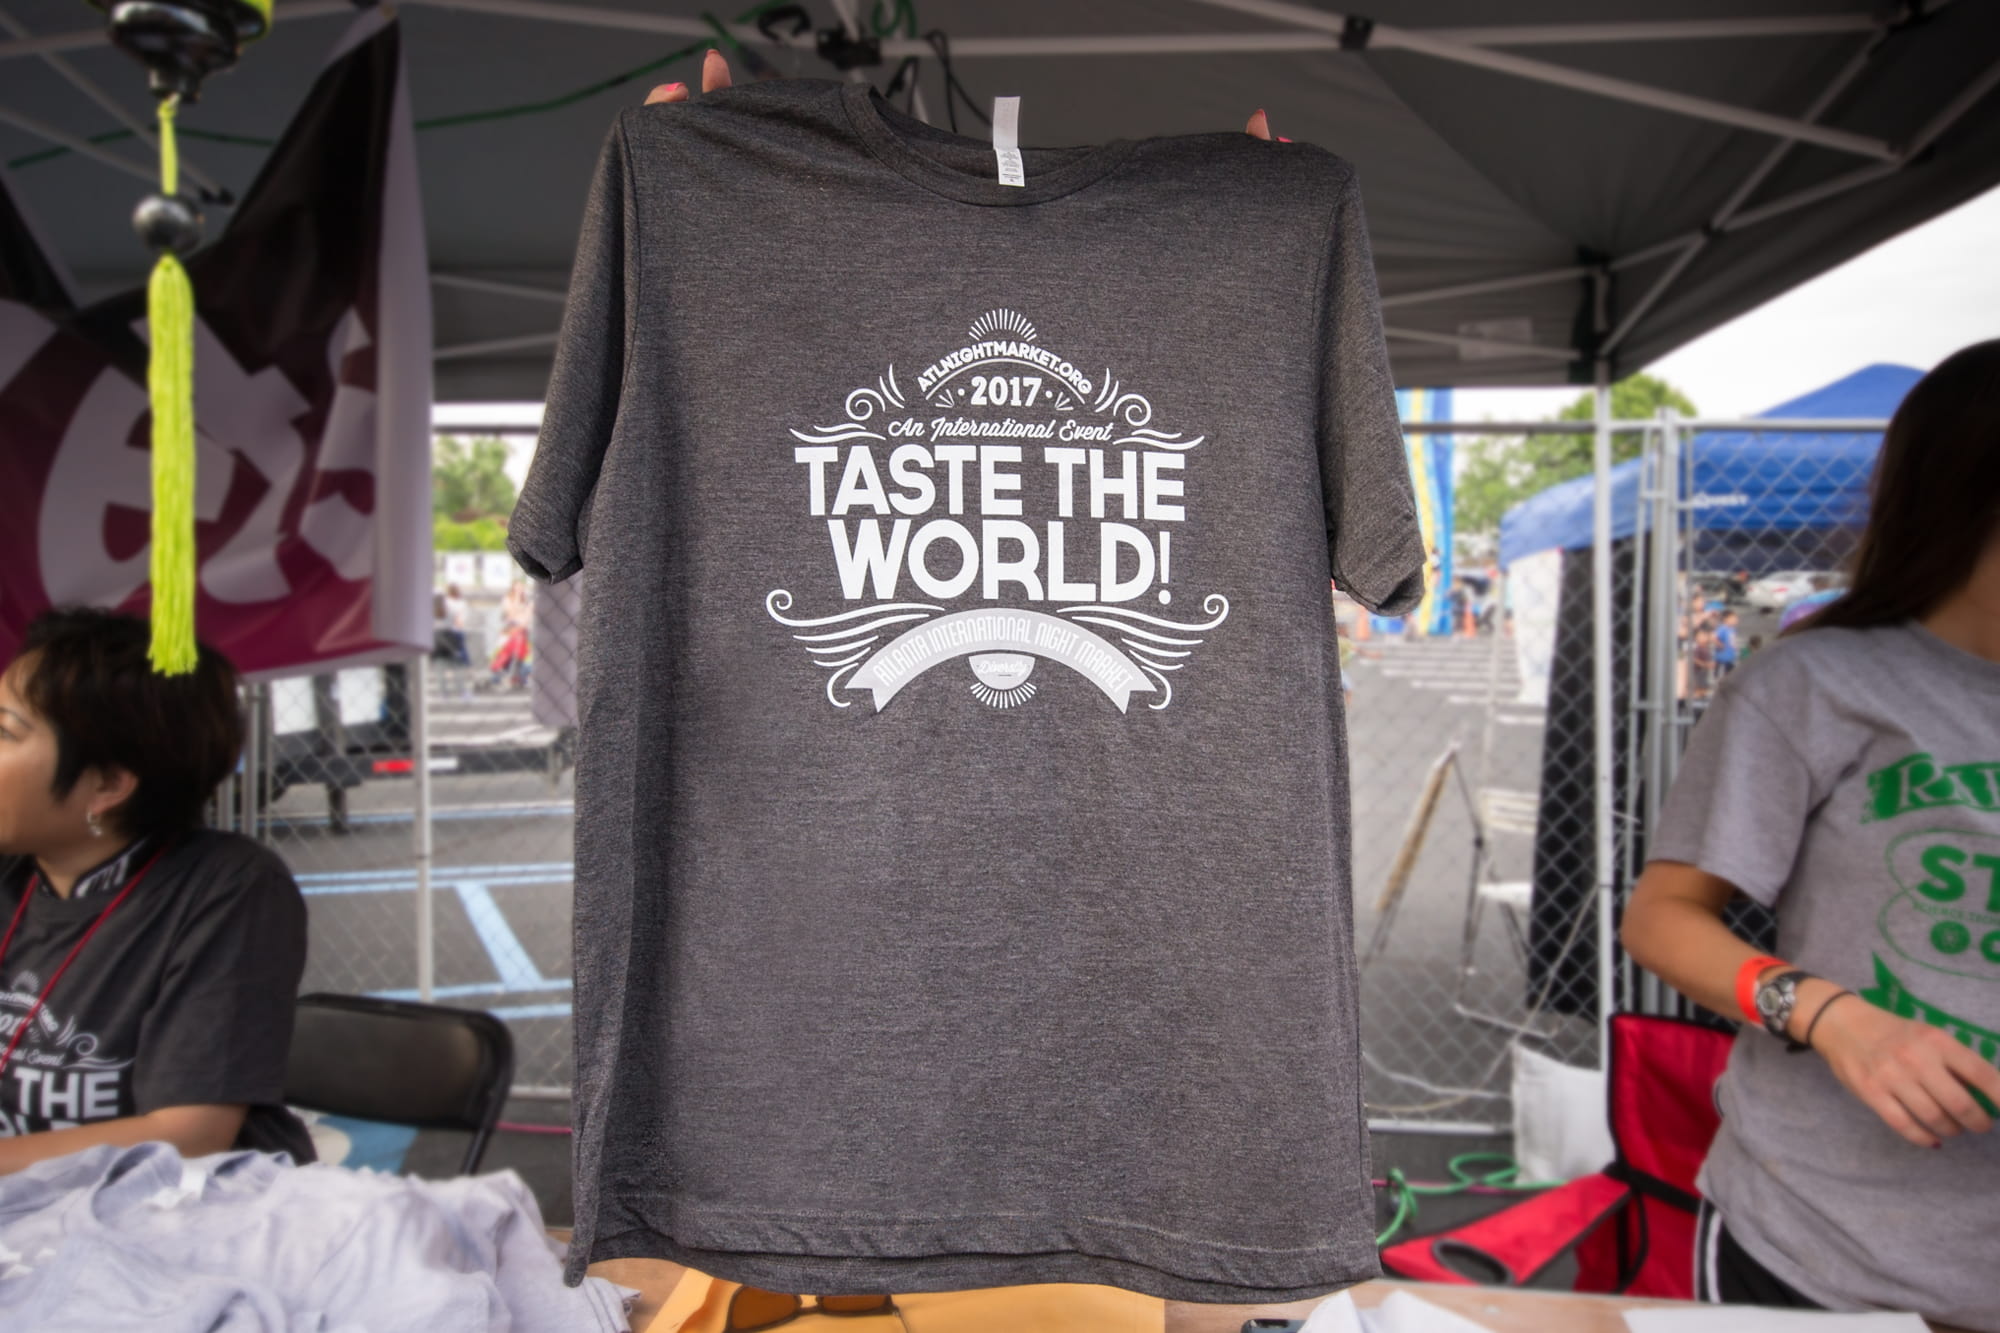 Photo of a custom event t-shirt being held up at a food festival.